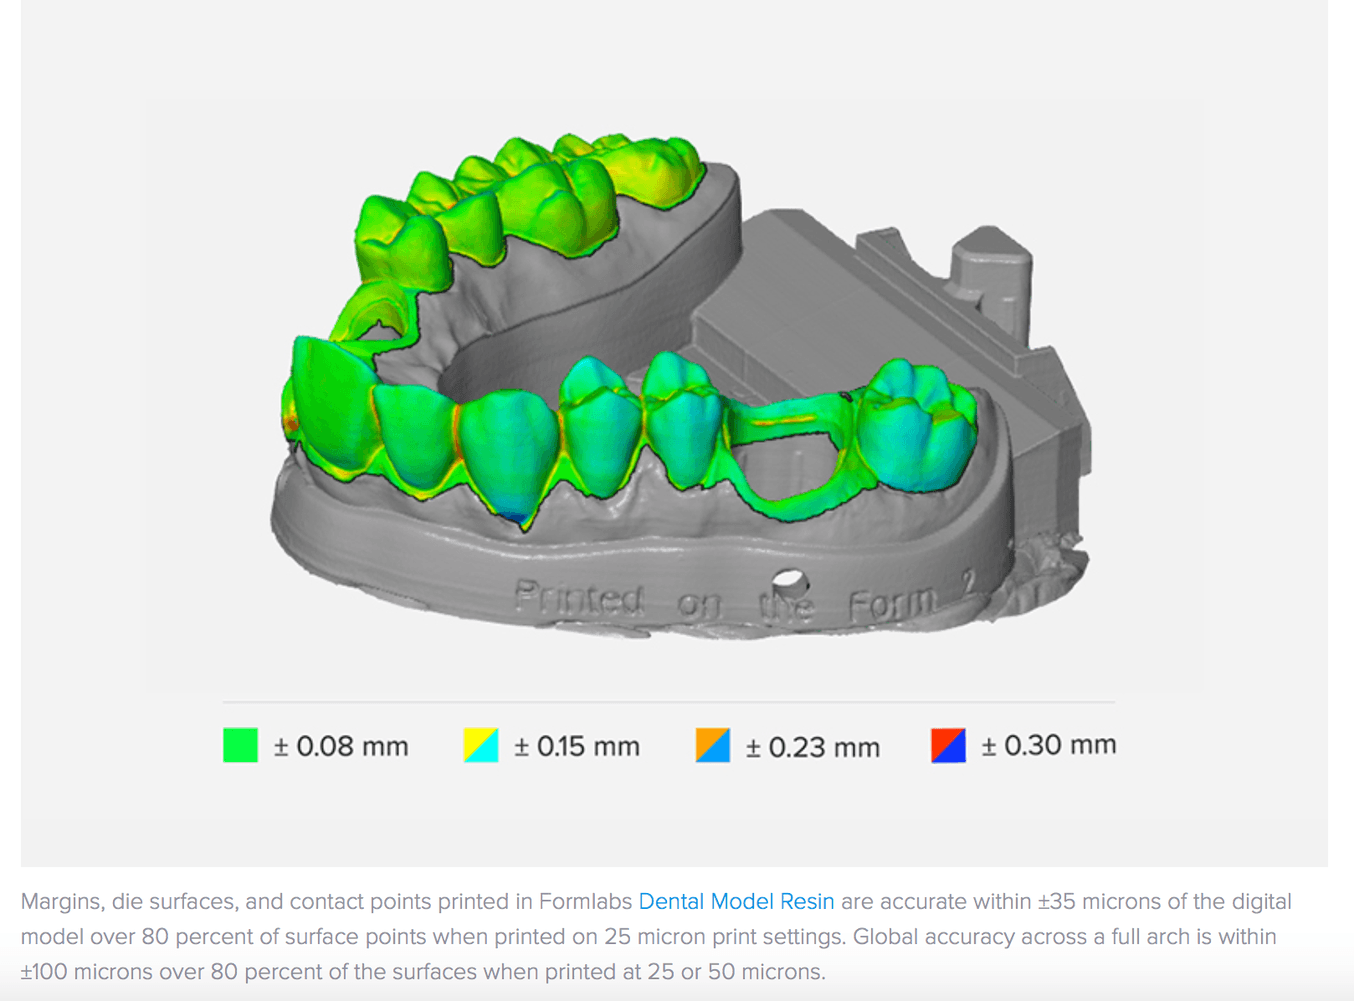 An example from the dental industry comparing a scanned component with the original CAD geometry, demonstrating the ability to maintain tight tolerances across an SLA printed part.